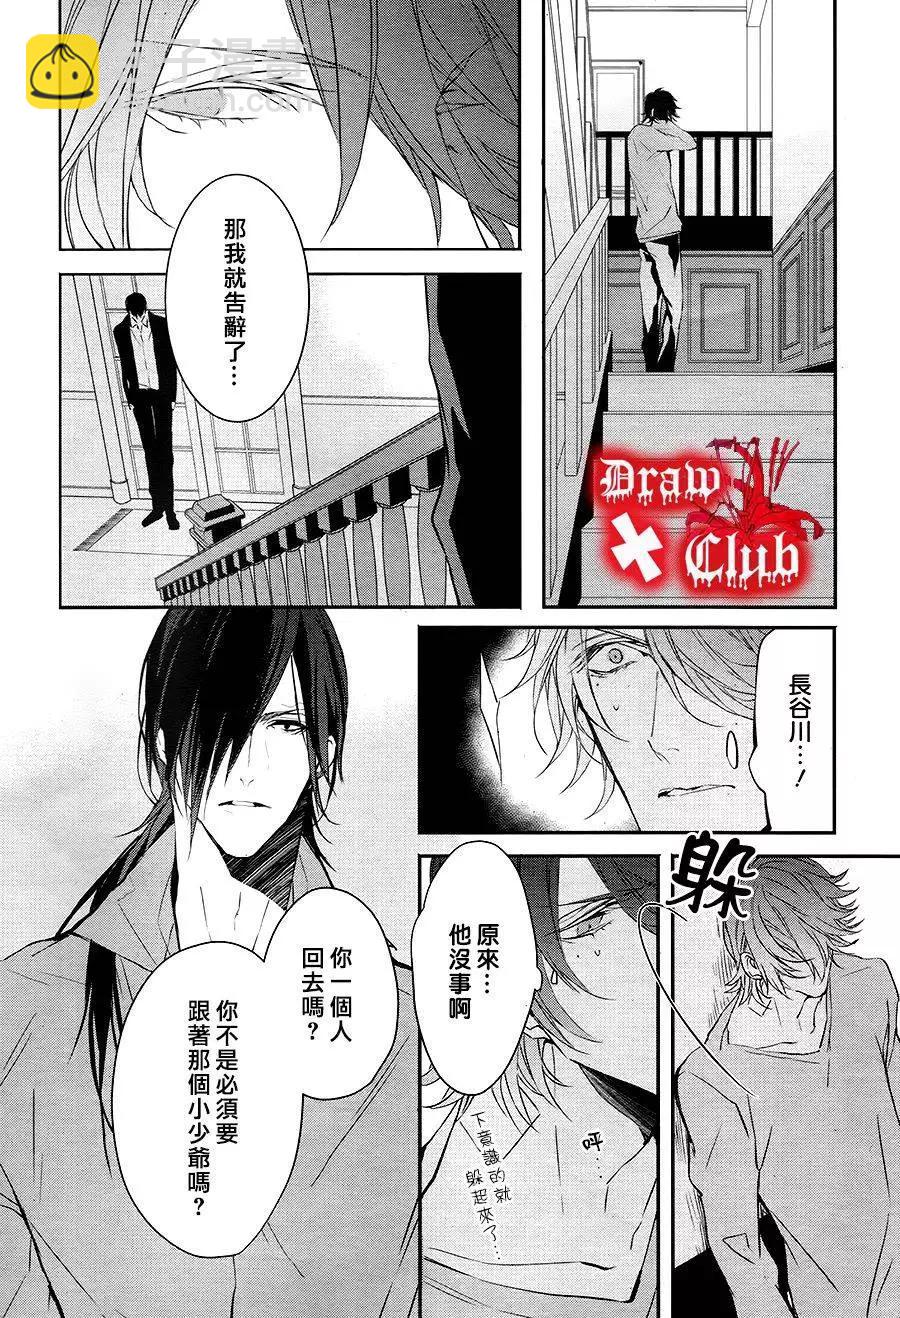 Bloody Mary - 第28回 - 7